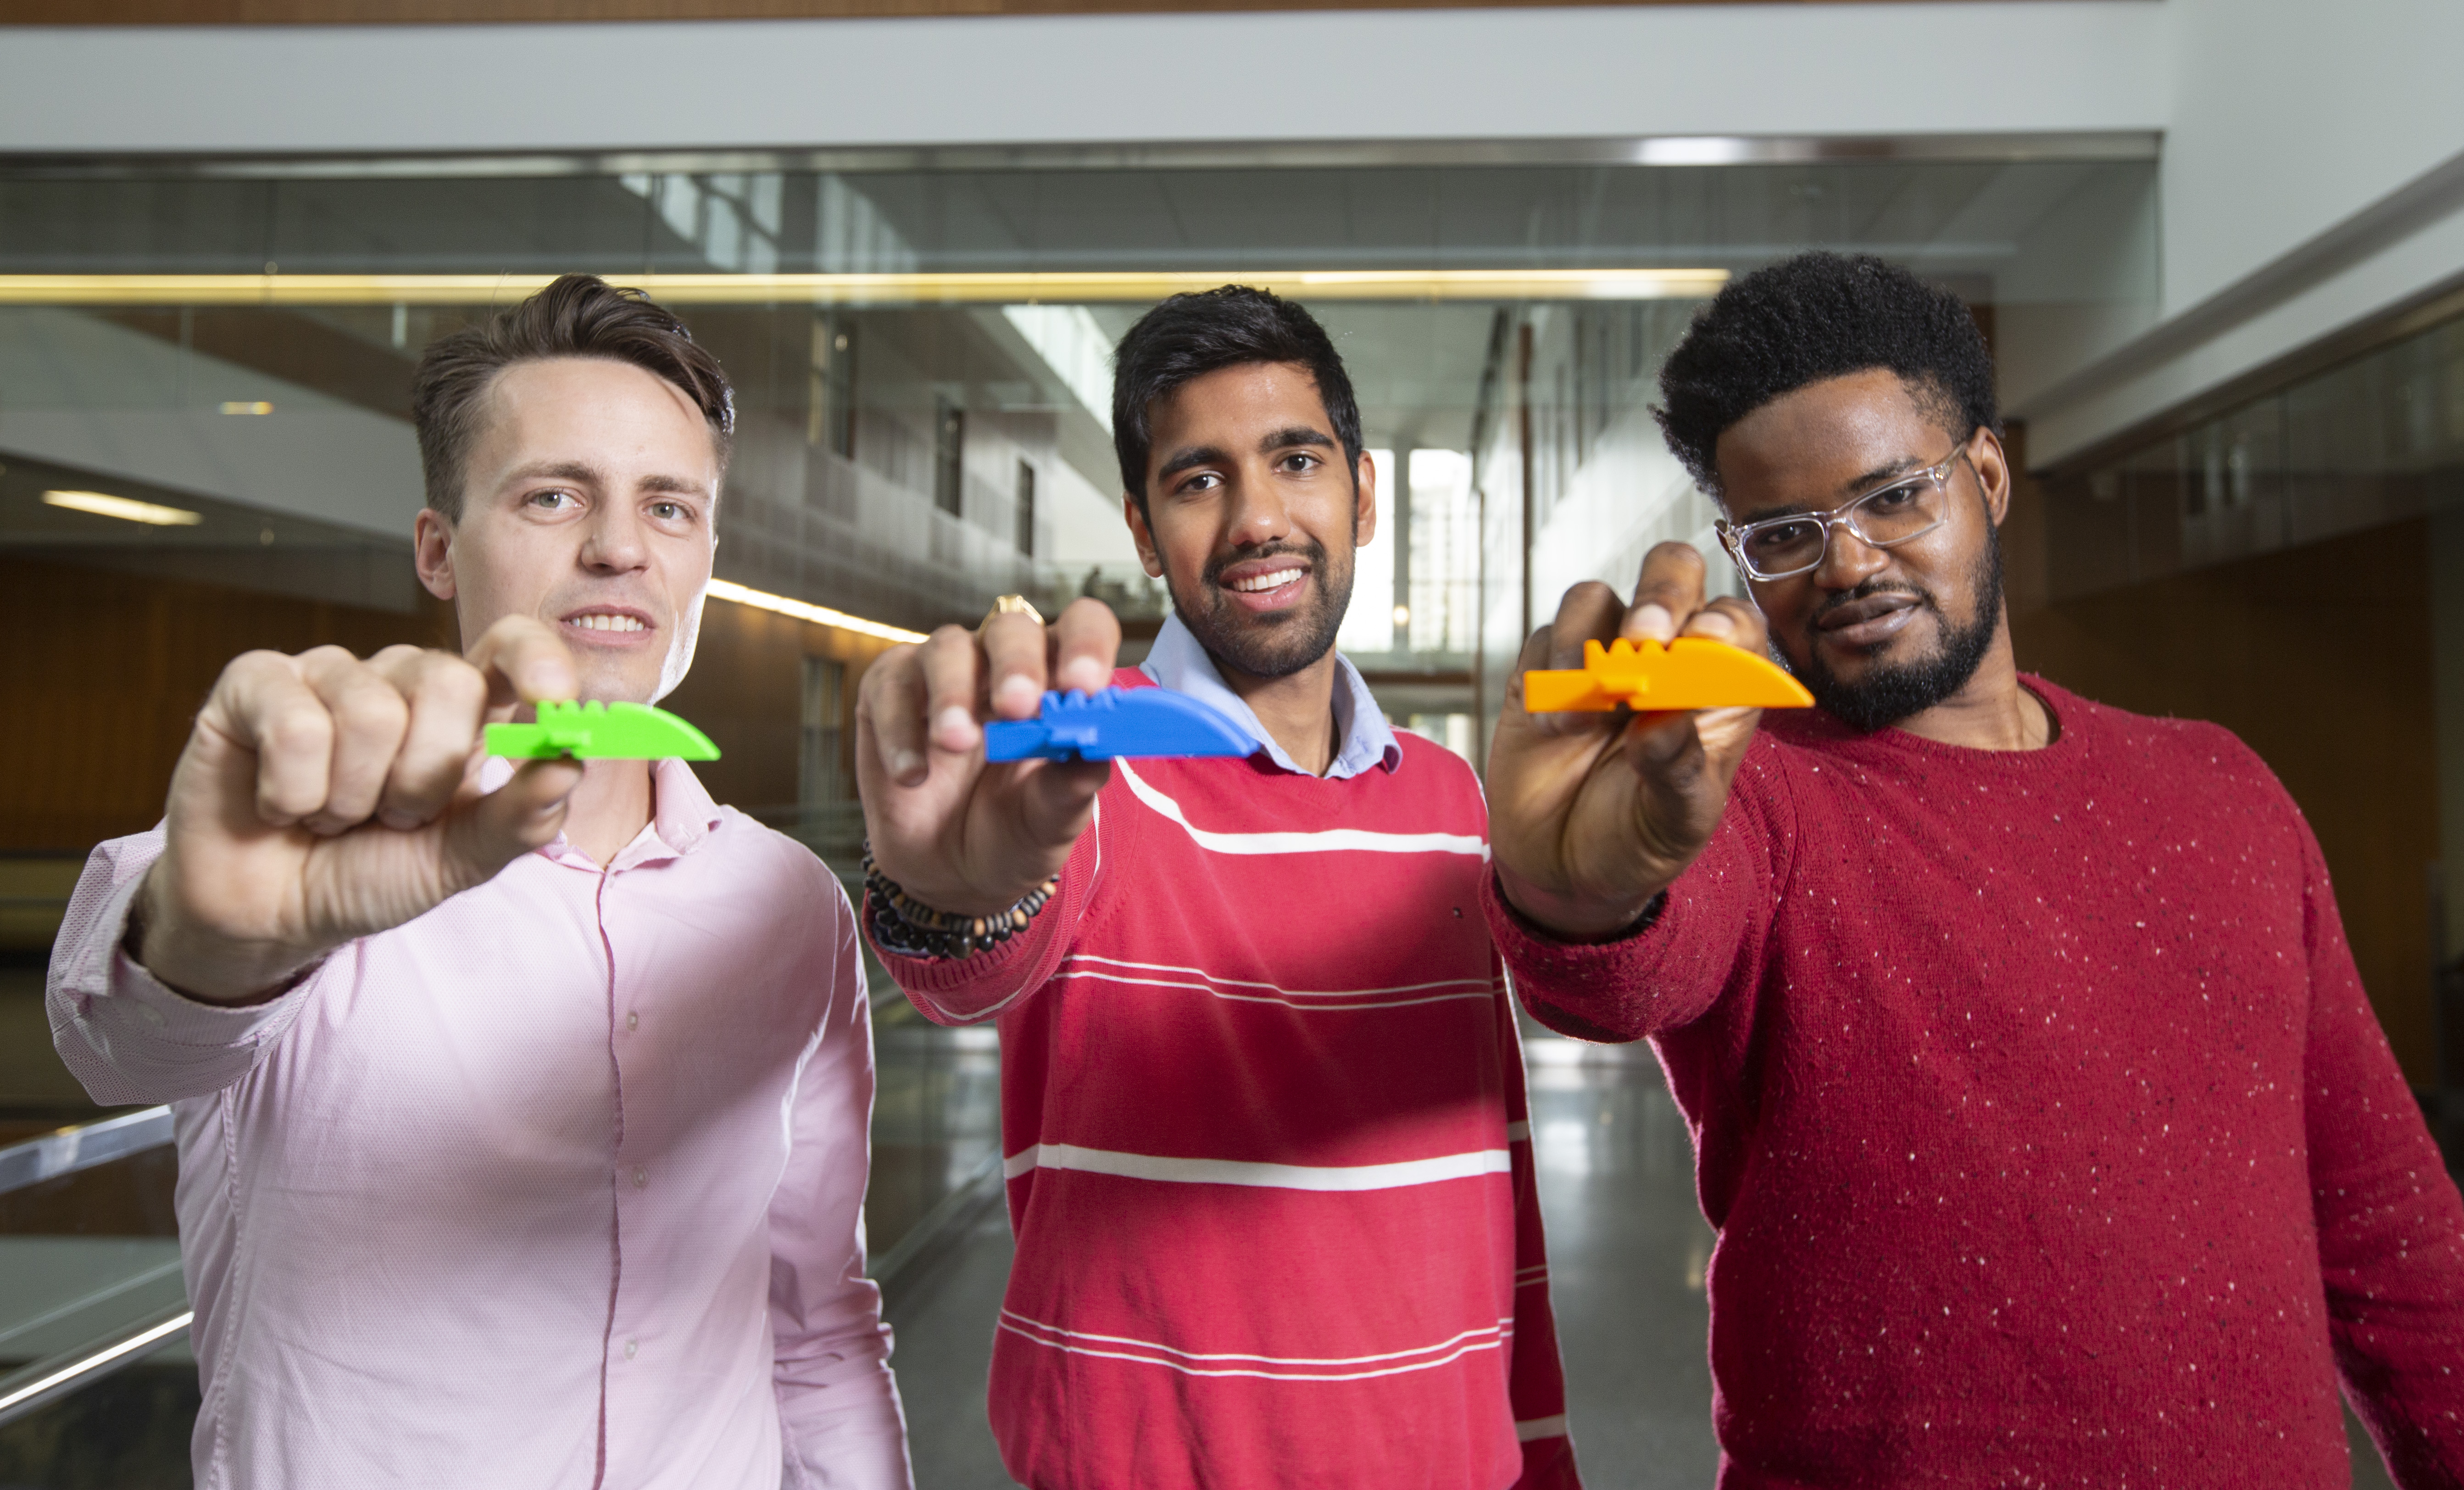 From the left: Soteria MedTech co-founders Cuylar Conly, Yash Shukla and Udoka Okpalauwaekwe hold a Lego-like airway device that could help save lives. Photo by Dave Stobbe